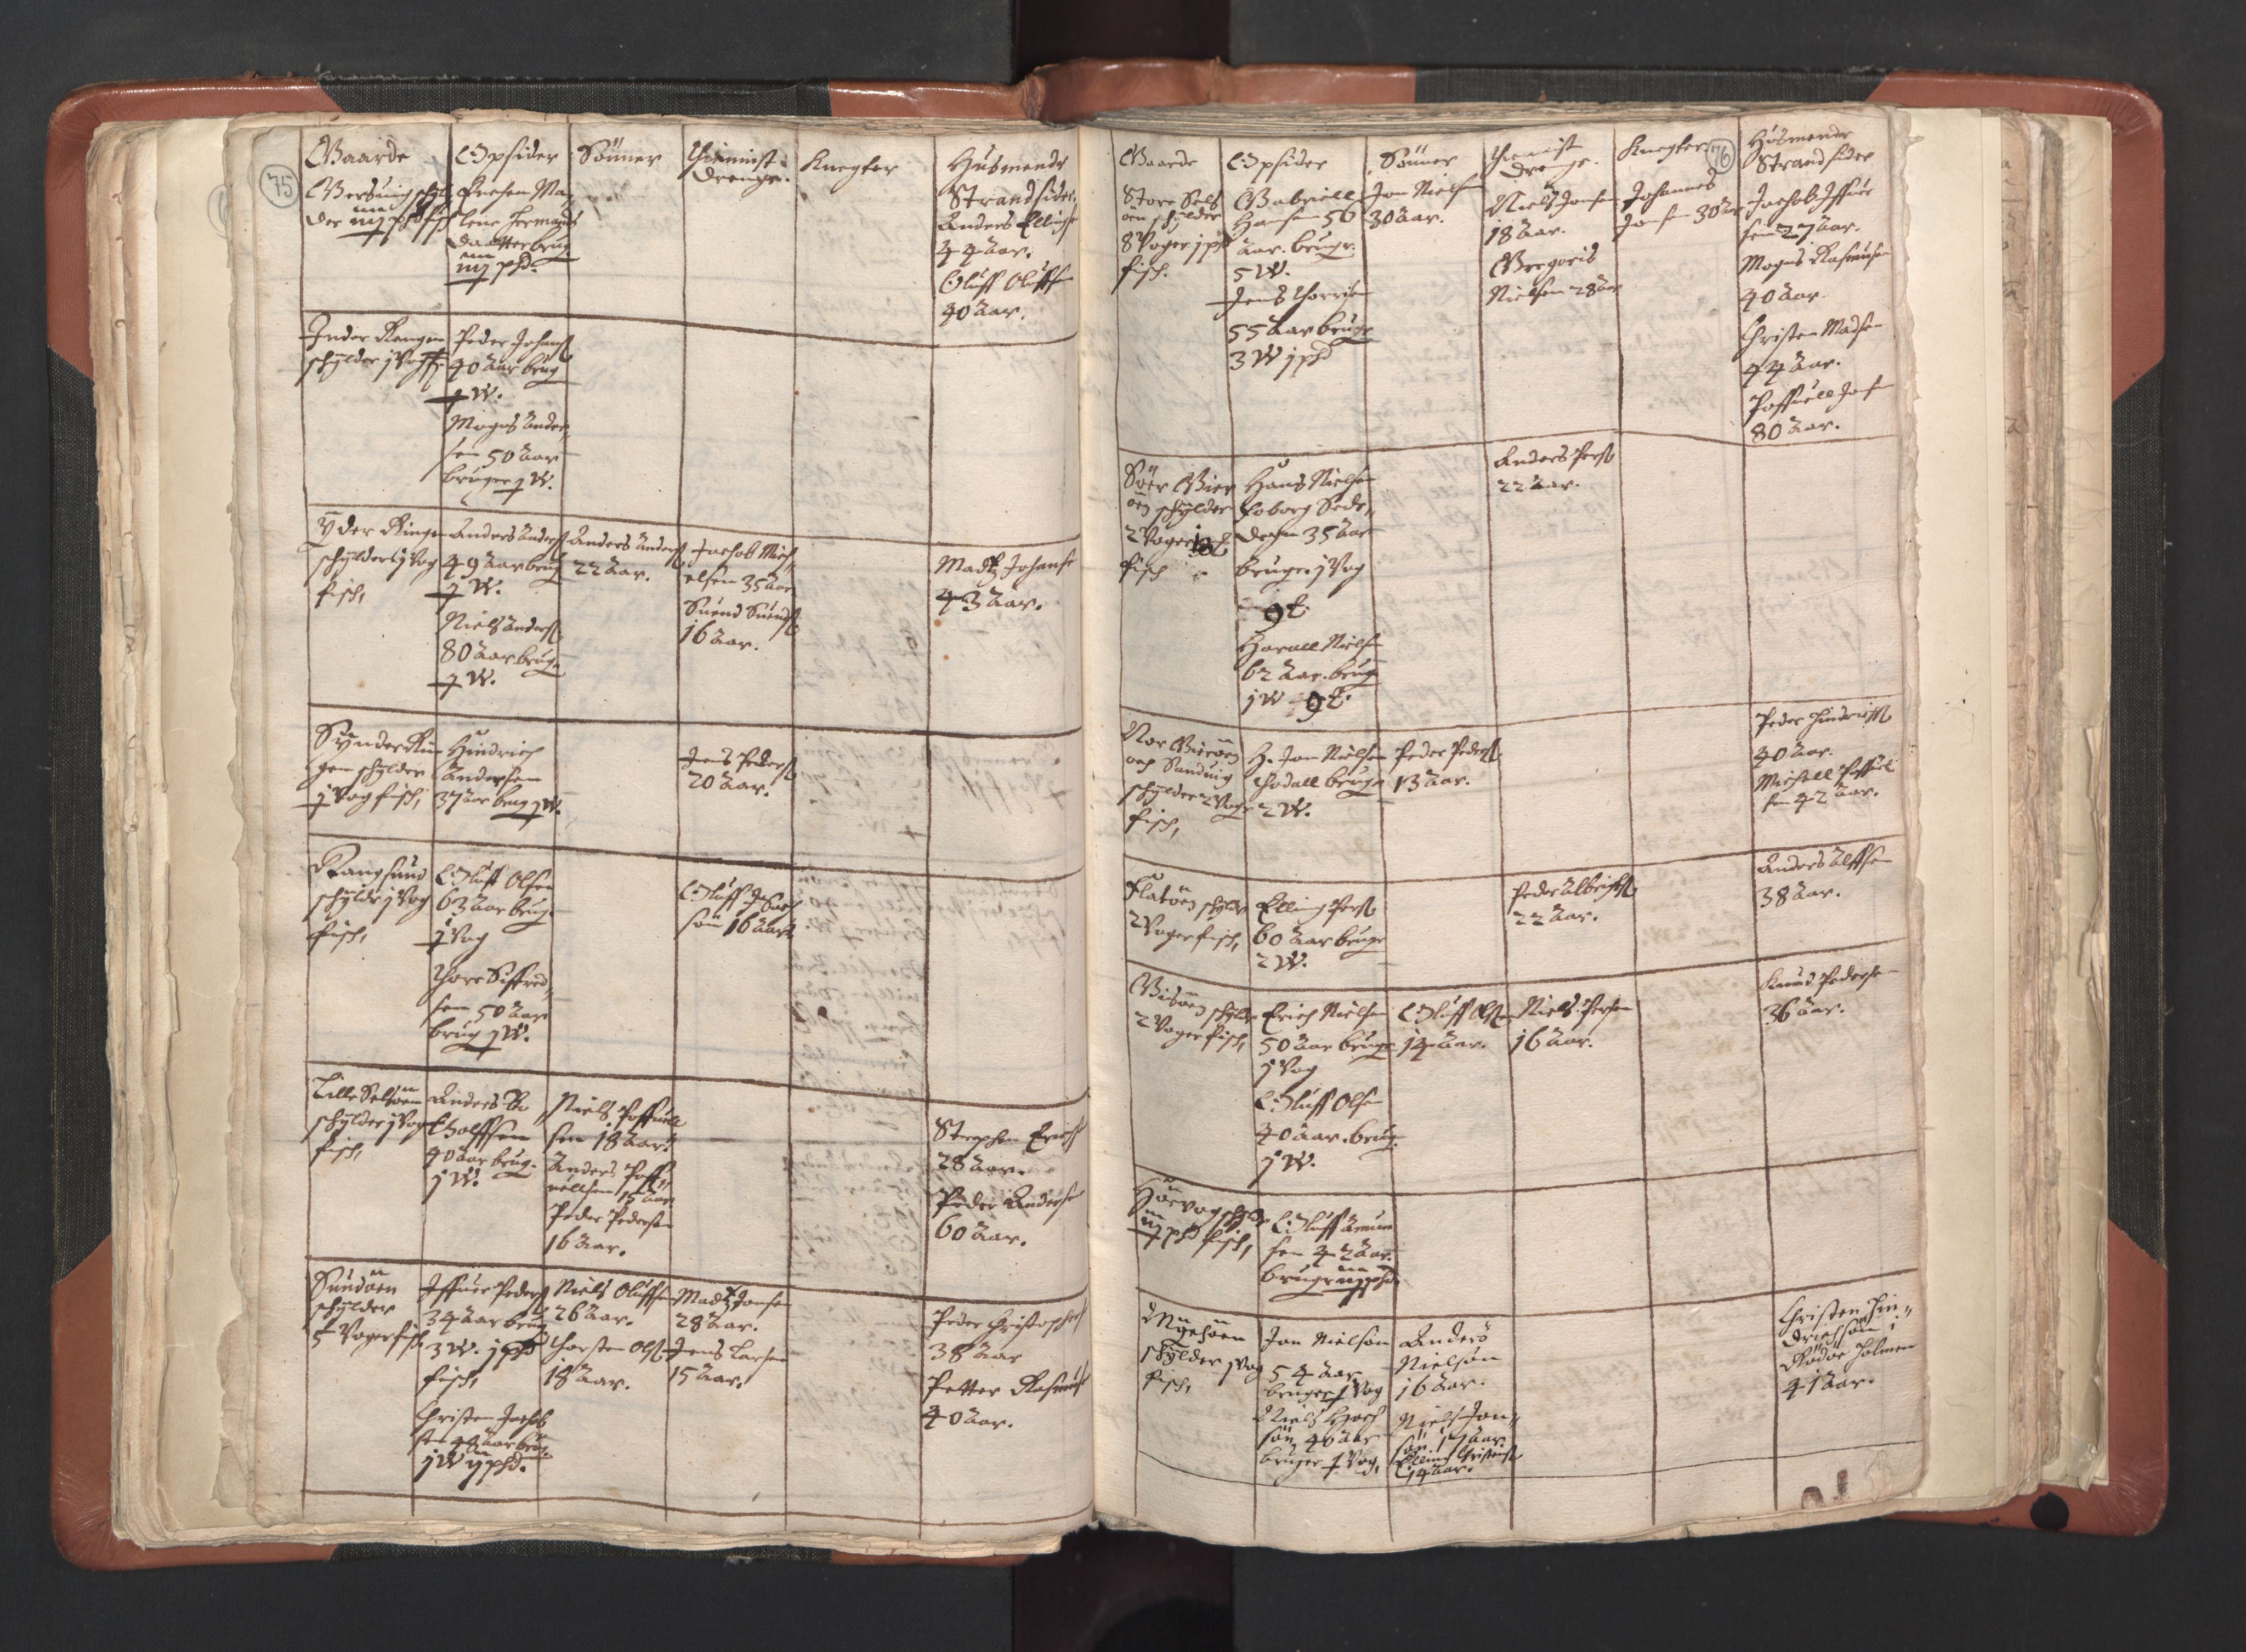 RA, Vicar's Census 1664-1666, no. 35: Helgeland deanery and Salten deanery, 1664-1666, p. 75-76